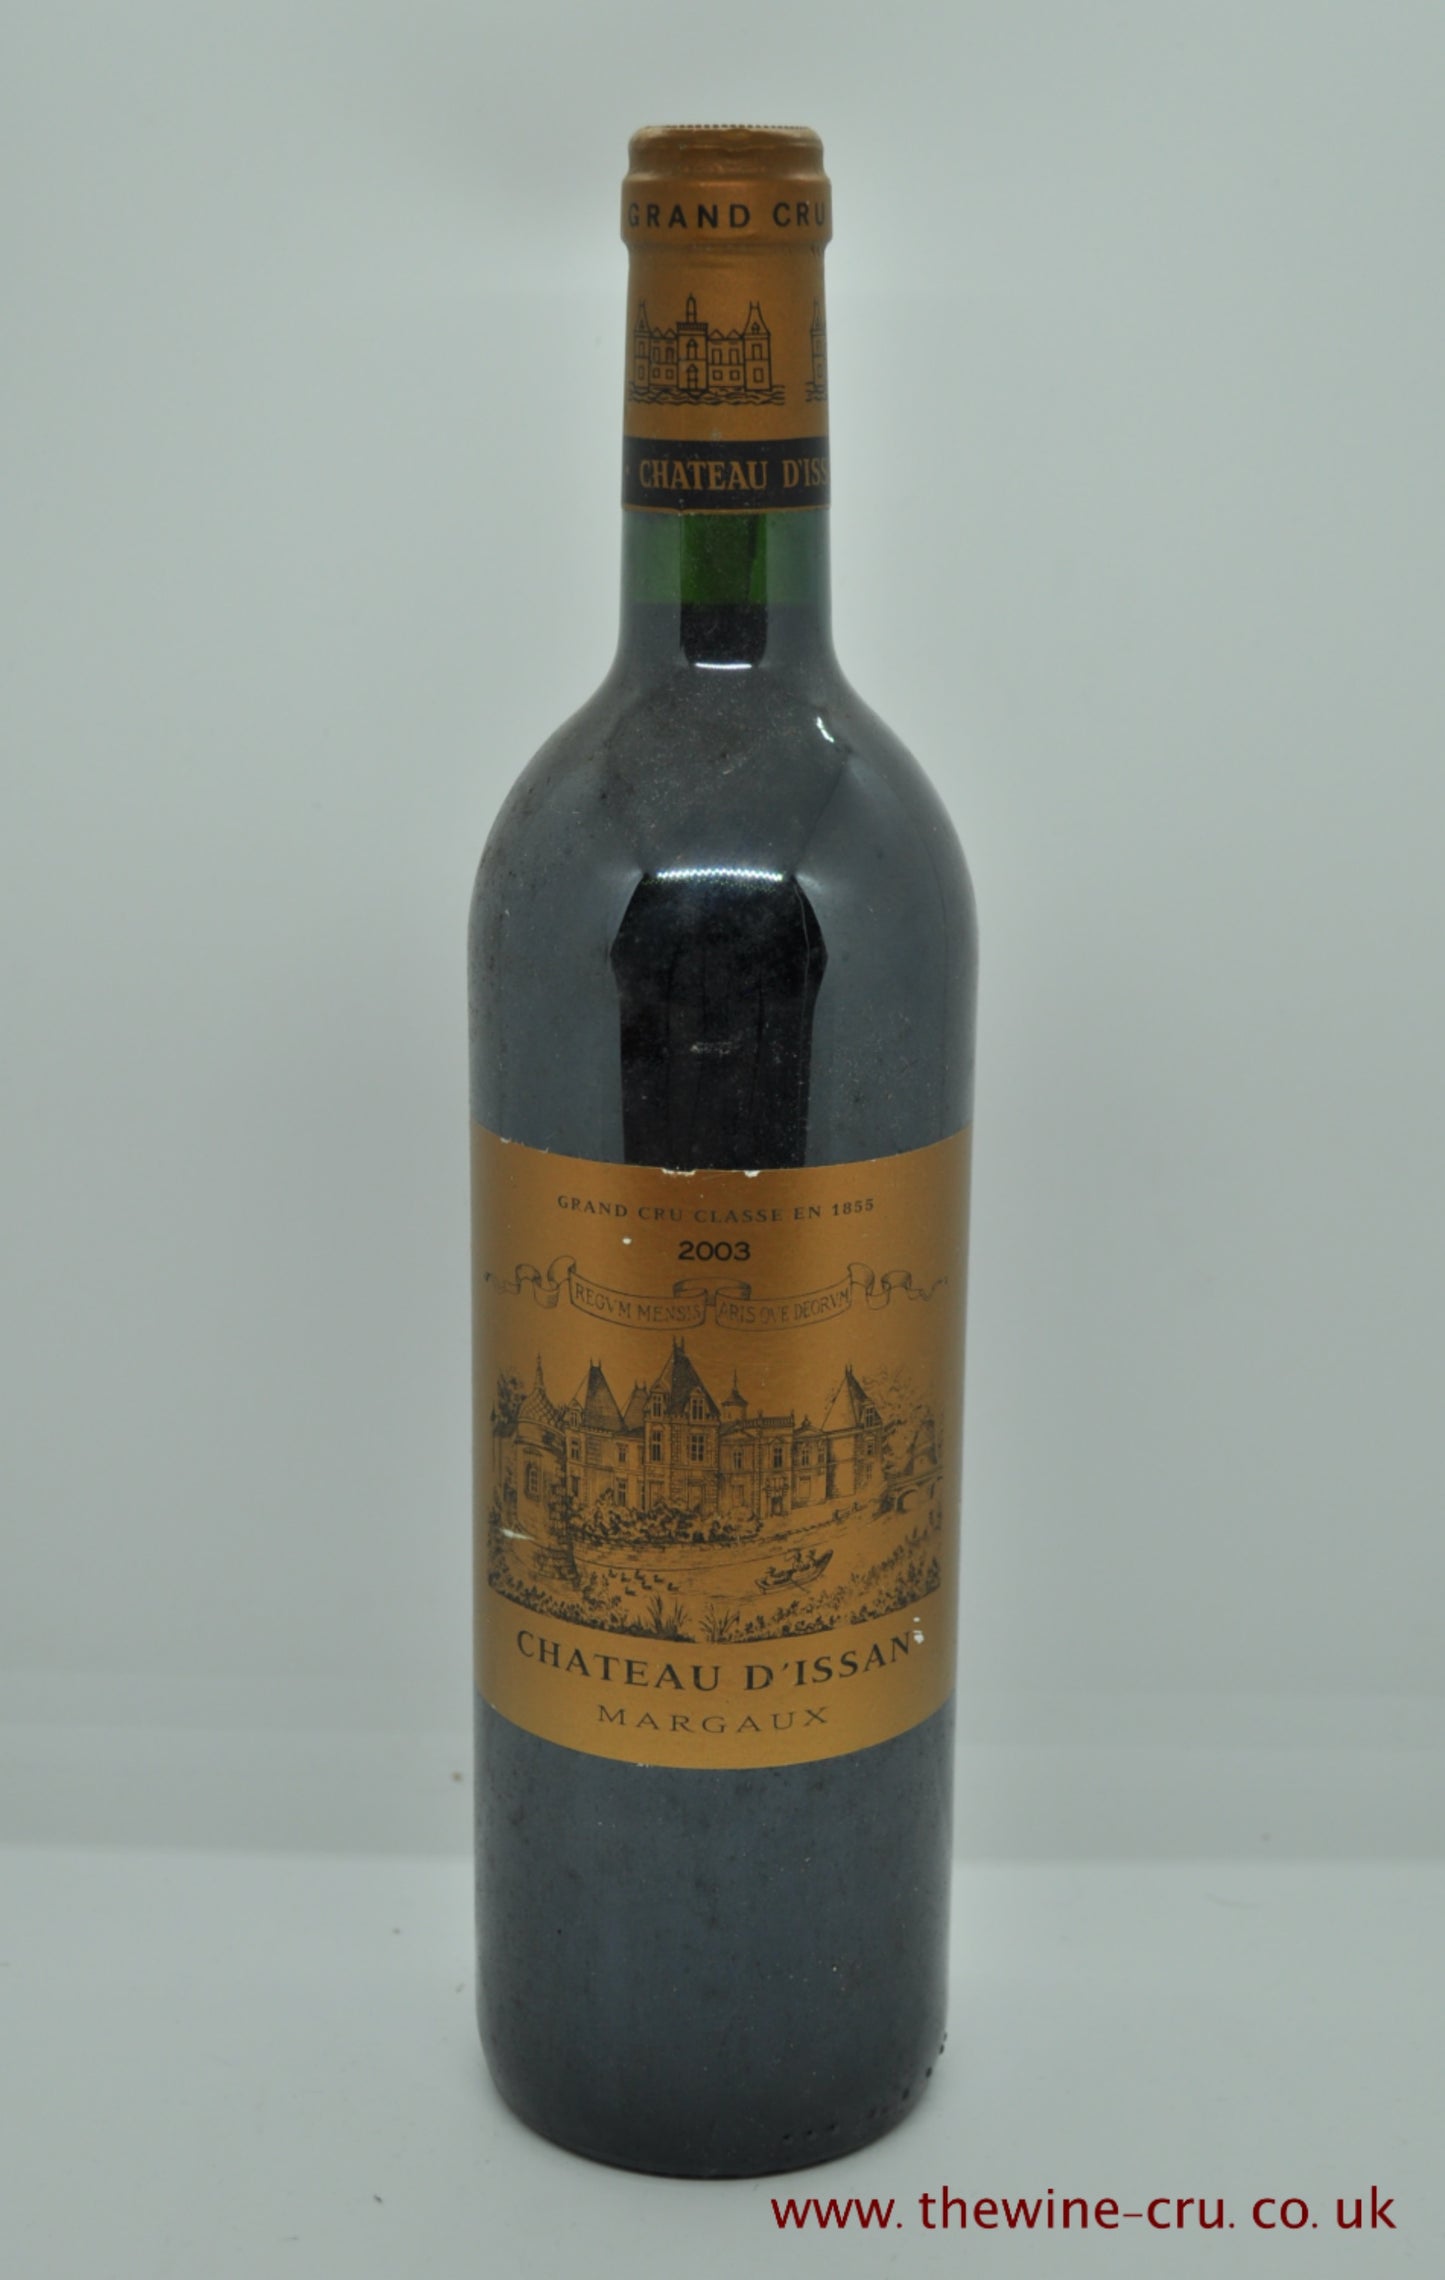 2003 vintage red wine. Chateau D'Issan 2003. France, Bordeaux. Immediate delivery. Free local delivery. Gift wrapping available.